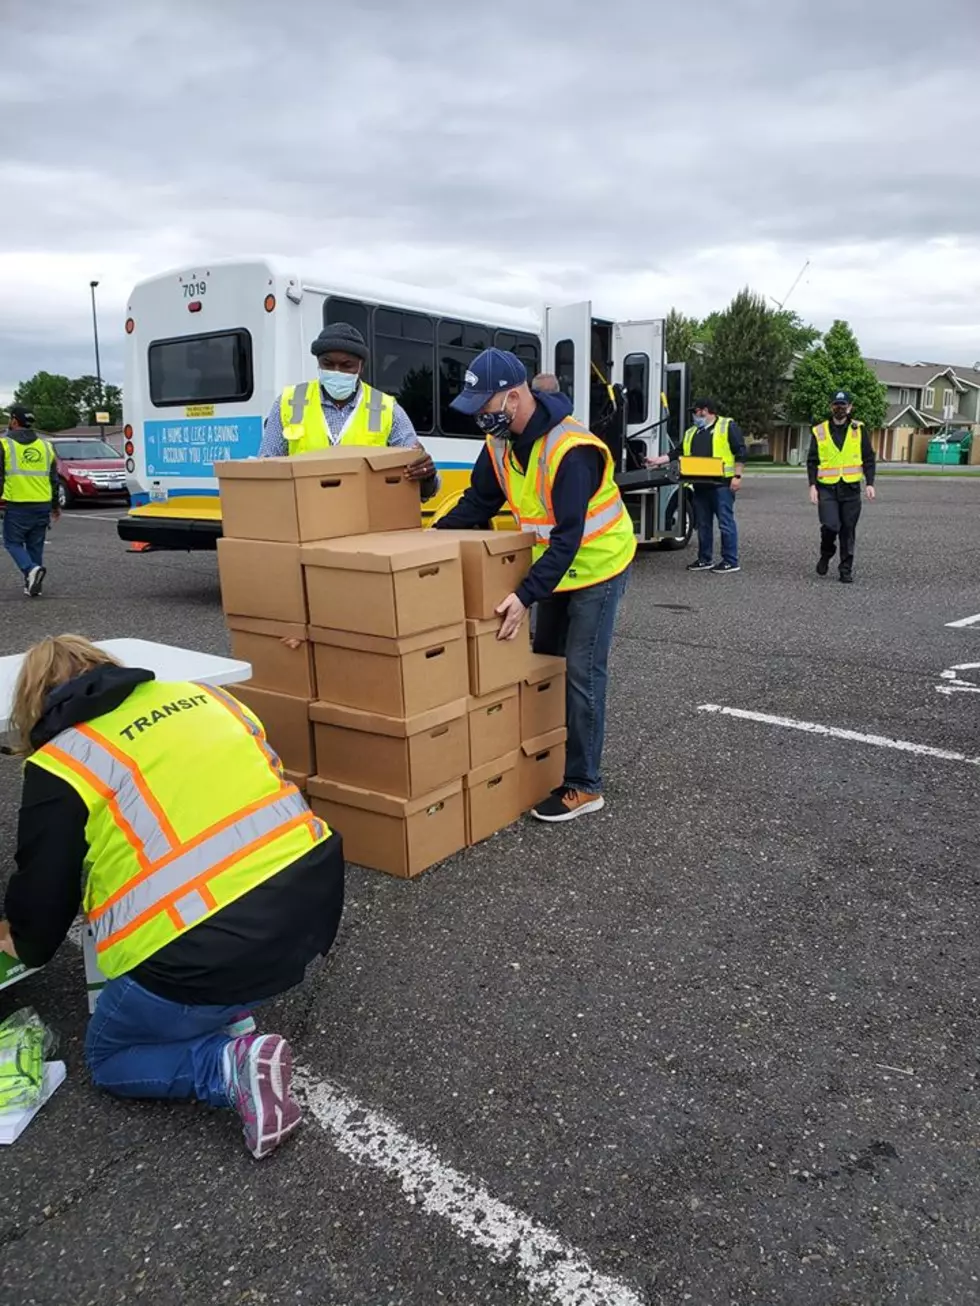 Huge Food Box Giveaway Event Planned Tomorrow in Tri-Cities & Prosser